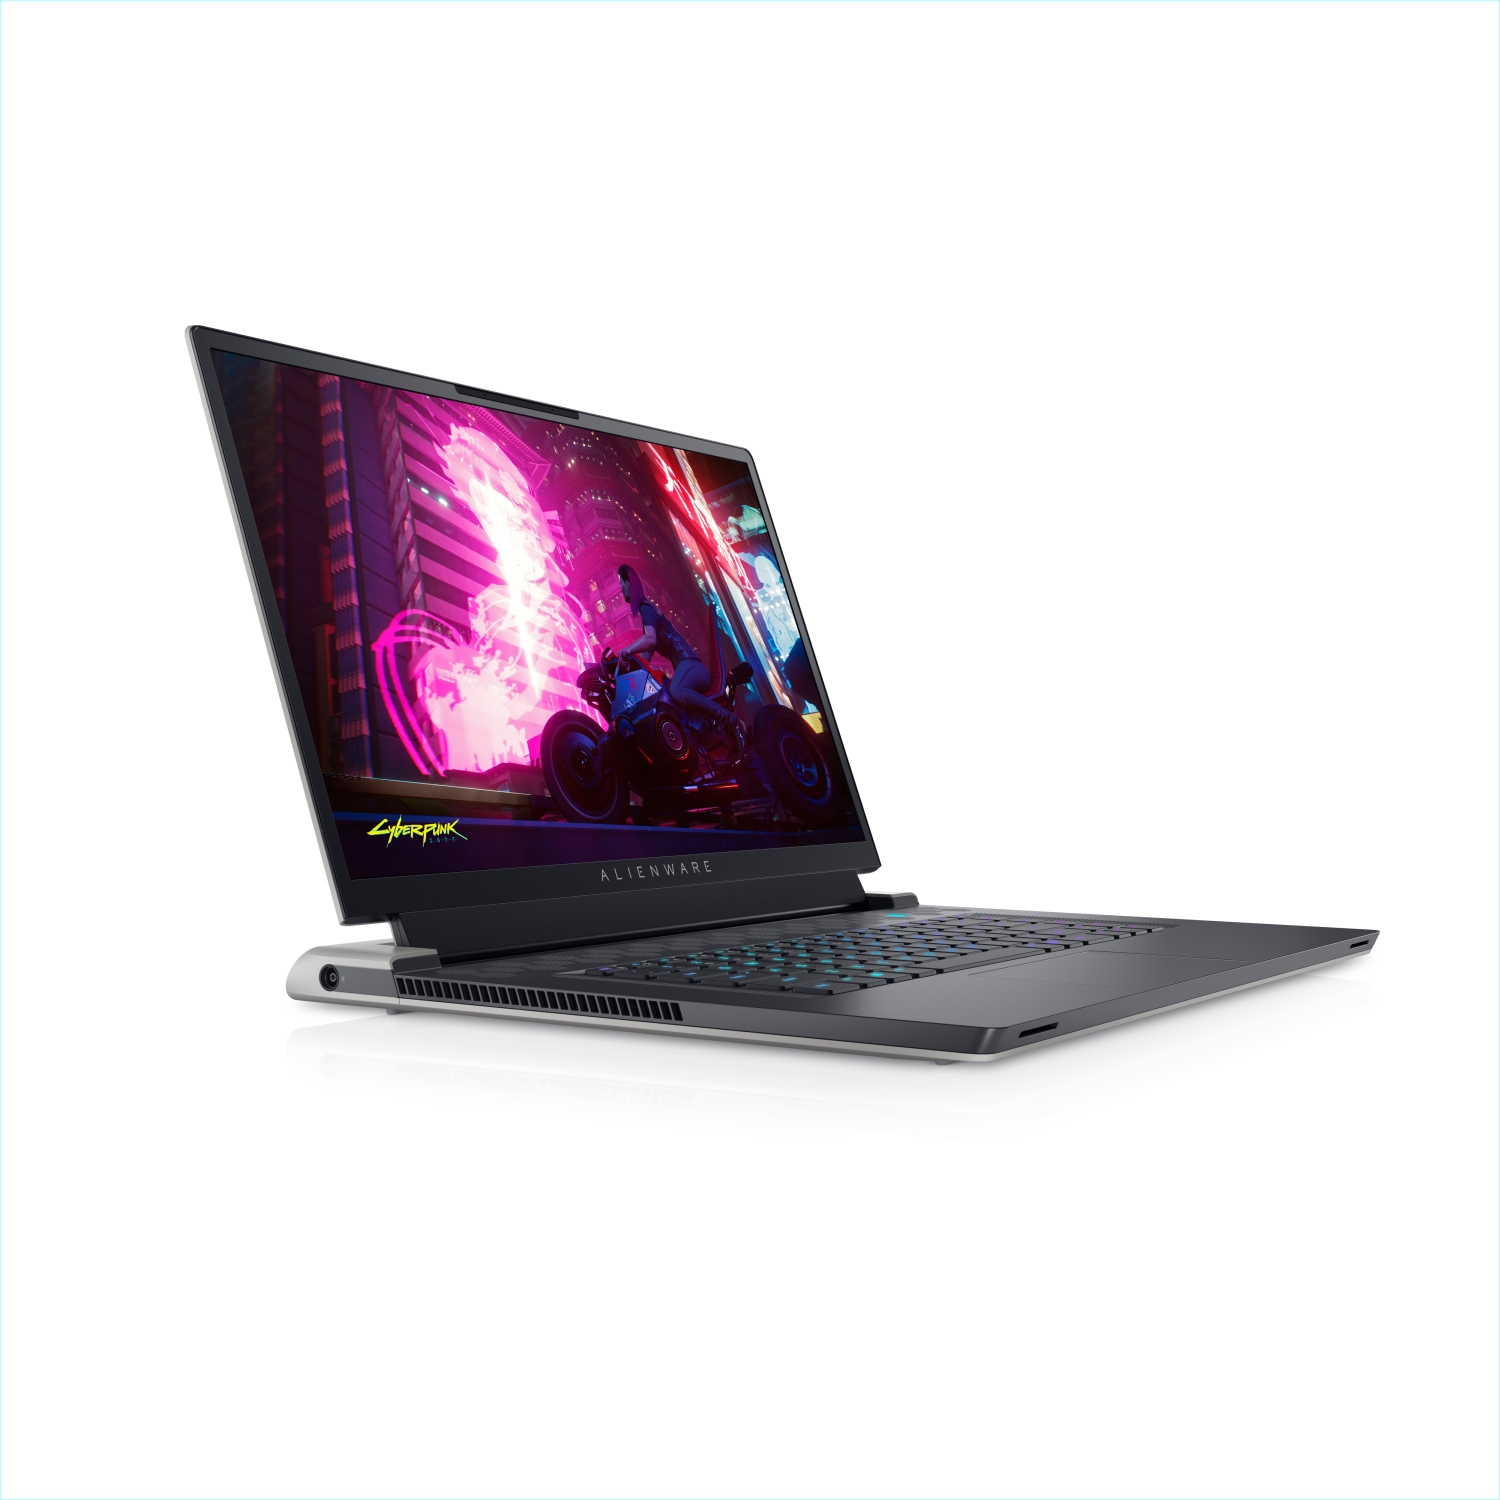 Refurbished (Excellent) - Dell Alienware X17 R1 Gaming Laptop (2021), 17.3" 4K, Core i7, 1TB SSD, 16GB RAM, RTX 3070, 8 Cores @ 4.6 GHz, 11th Gen CPU Certified